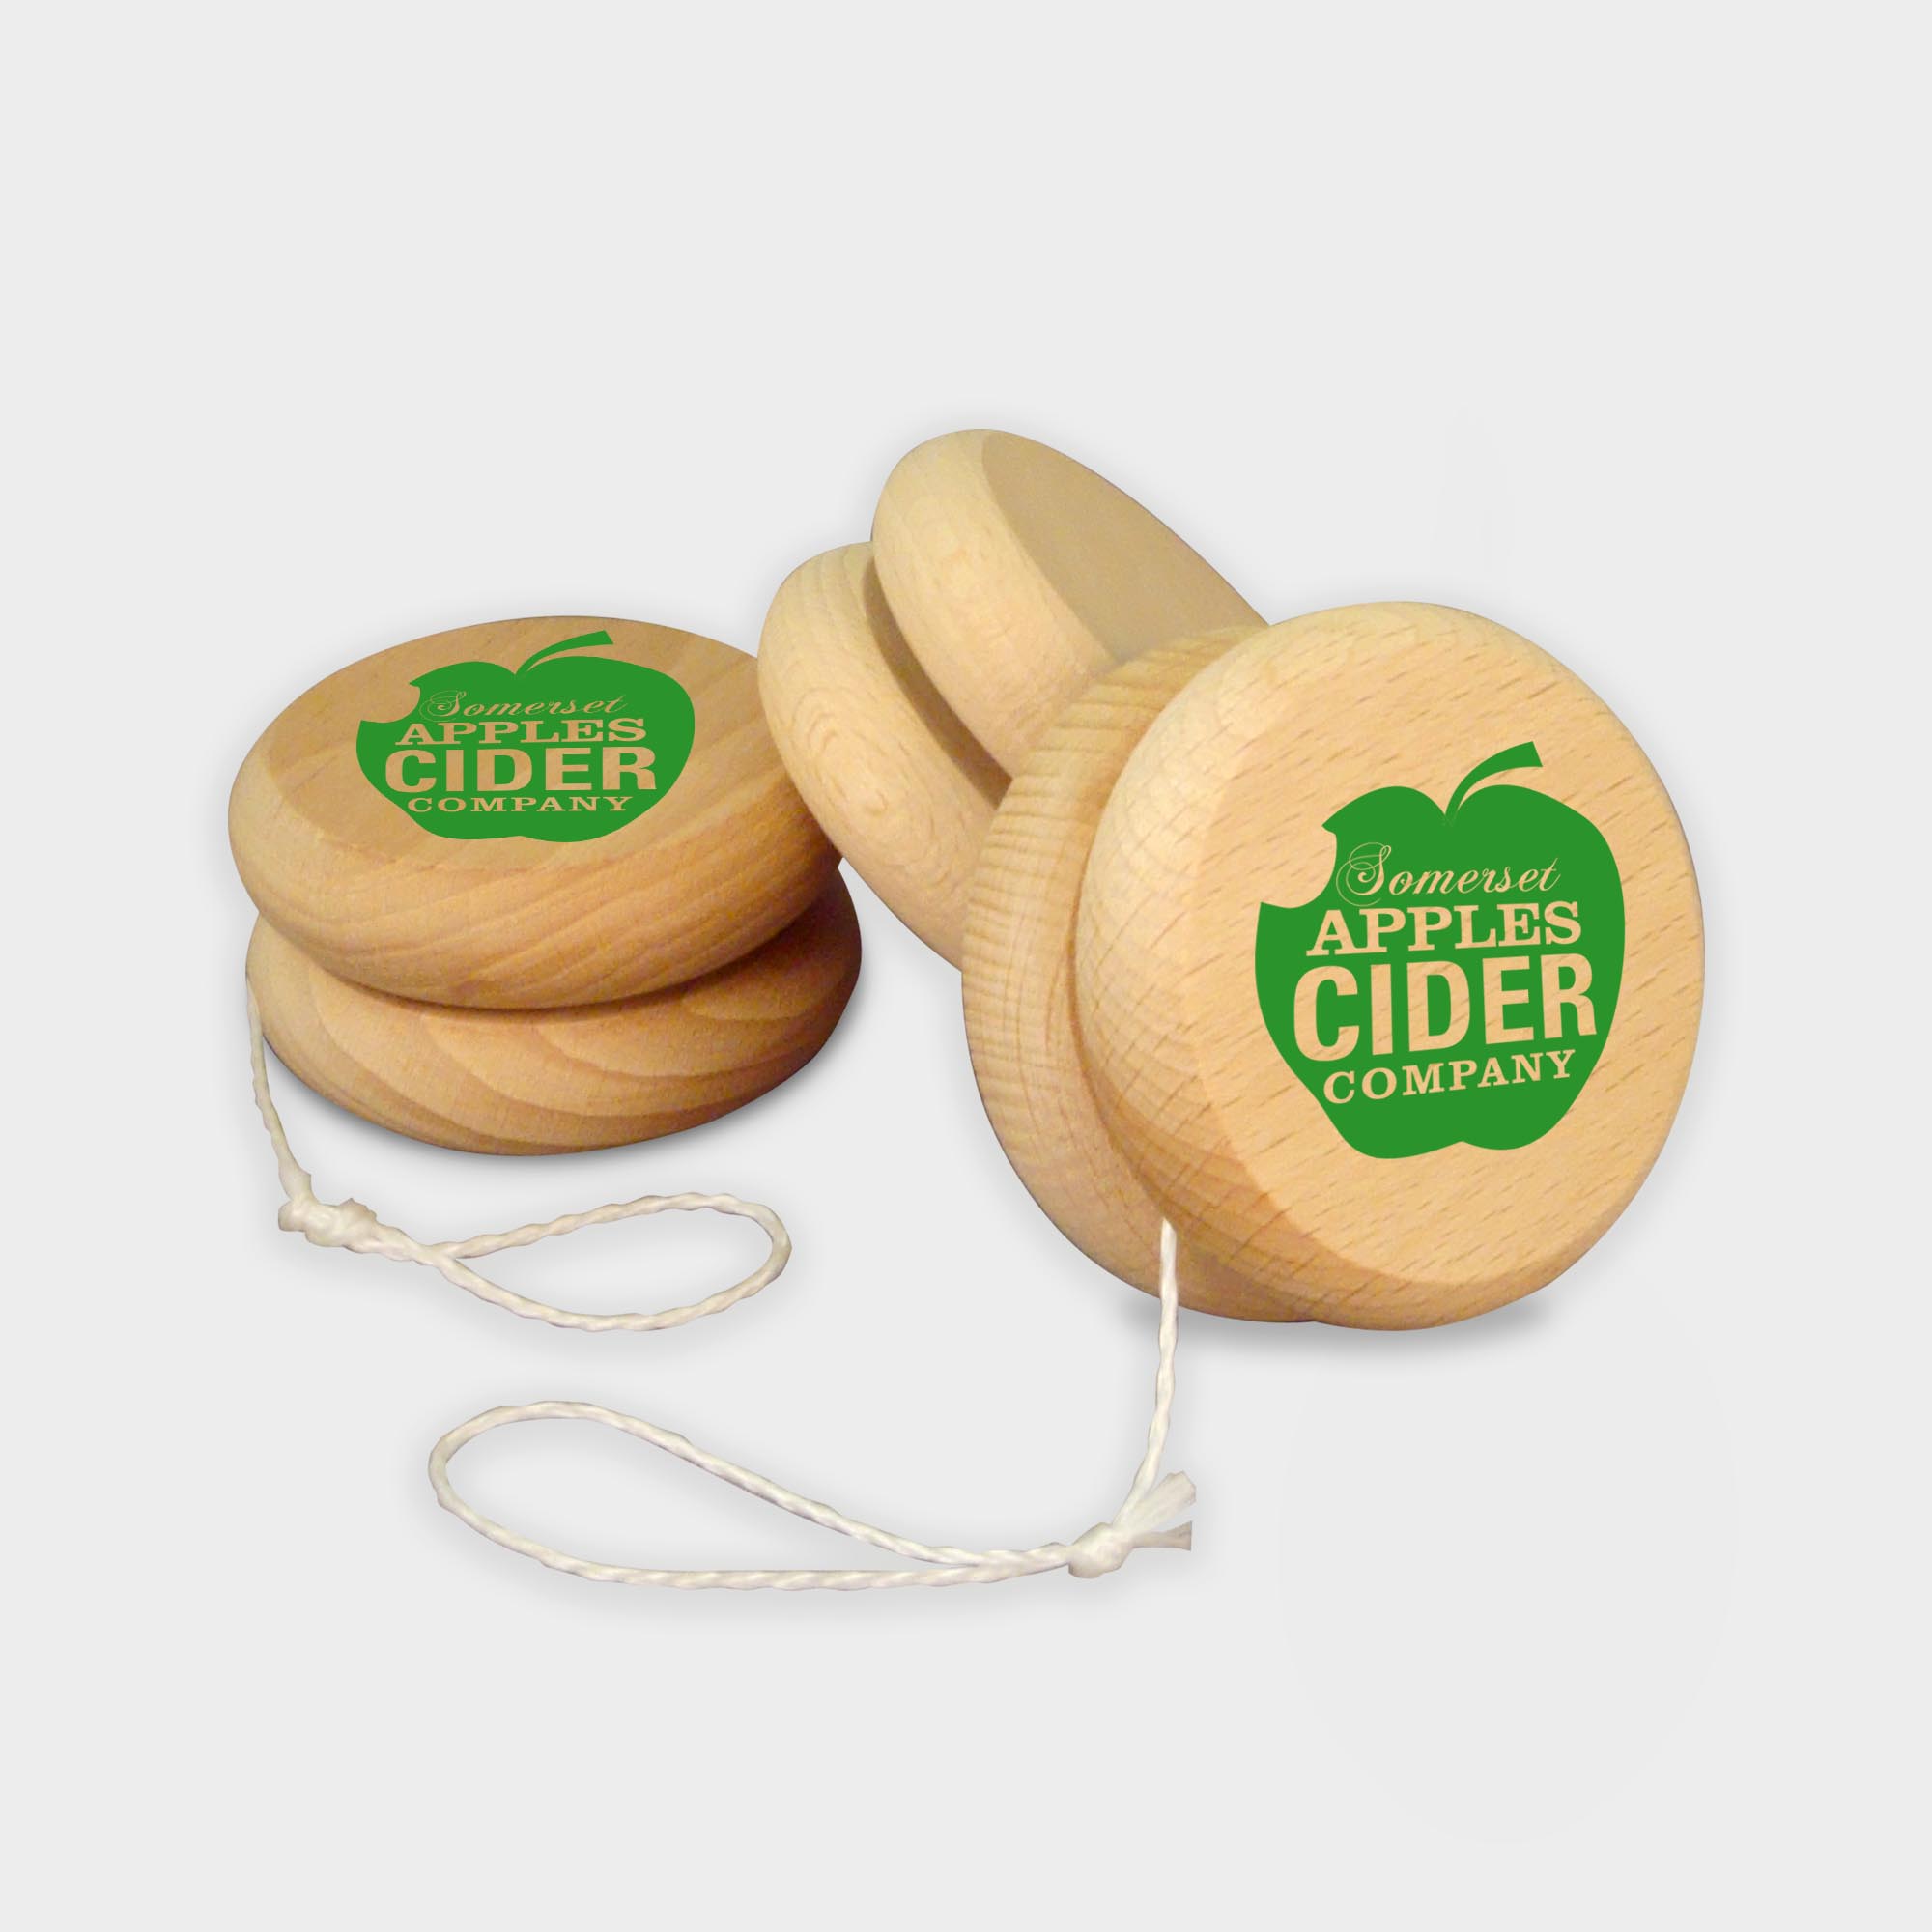 The Green & Good Wooden Yoyo made from sustainable timber. Great natural give-away. This item is made in the EU from sustainable timber and can be printed with a pad print or a digital print.